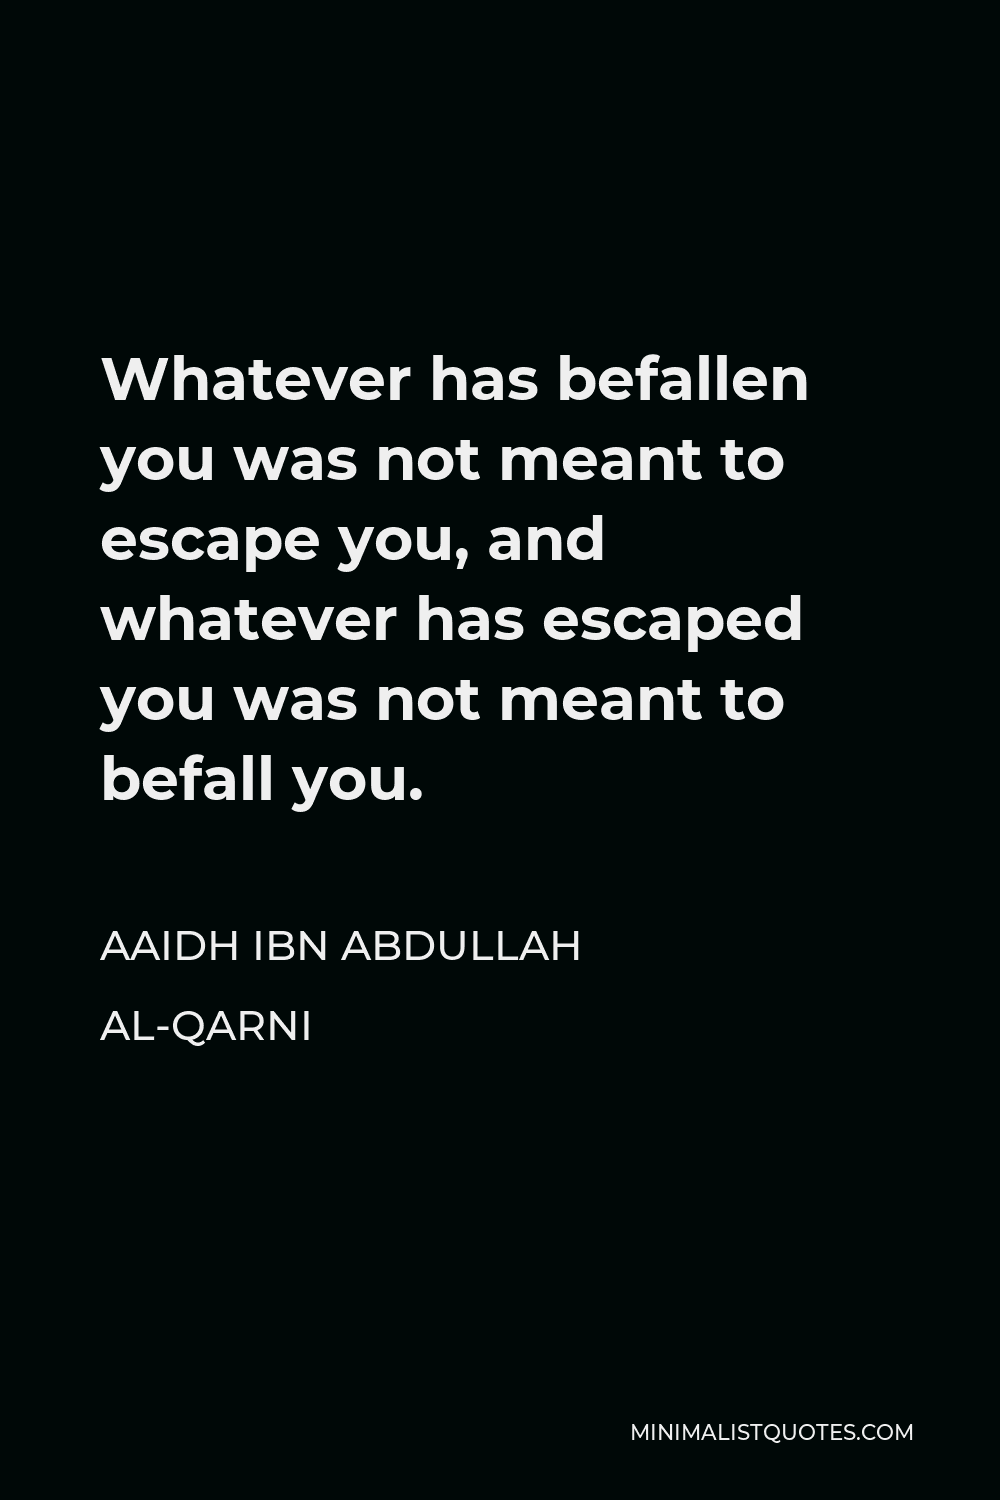 Aaidh ibn Abdullah al-Qarni Quote - Whatever has befallen you was not meant to escape you, and whatever has escaped you was not meant to befall you.